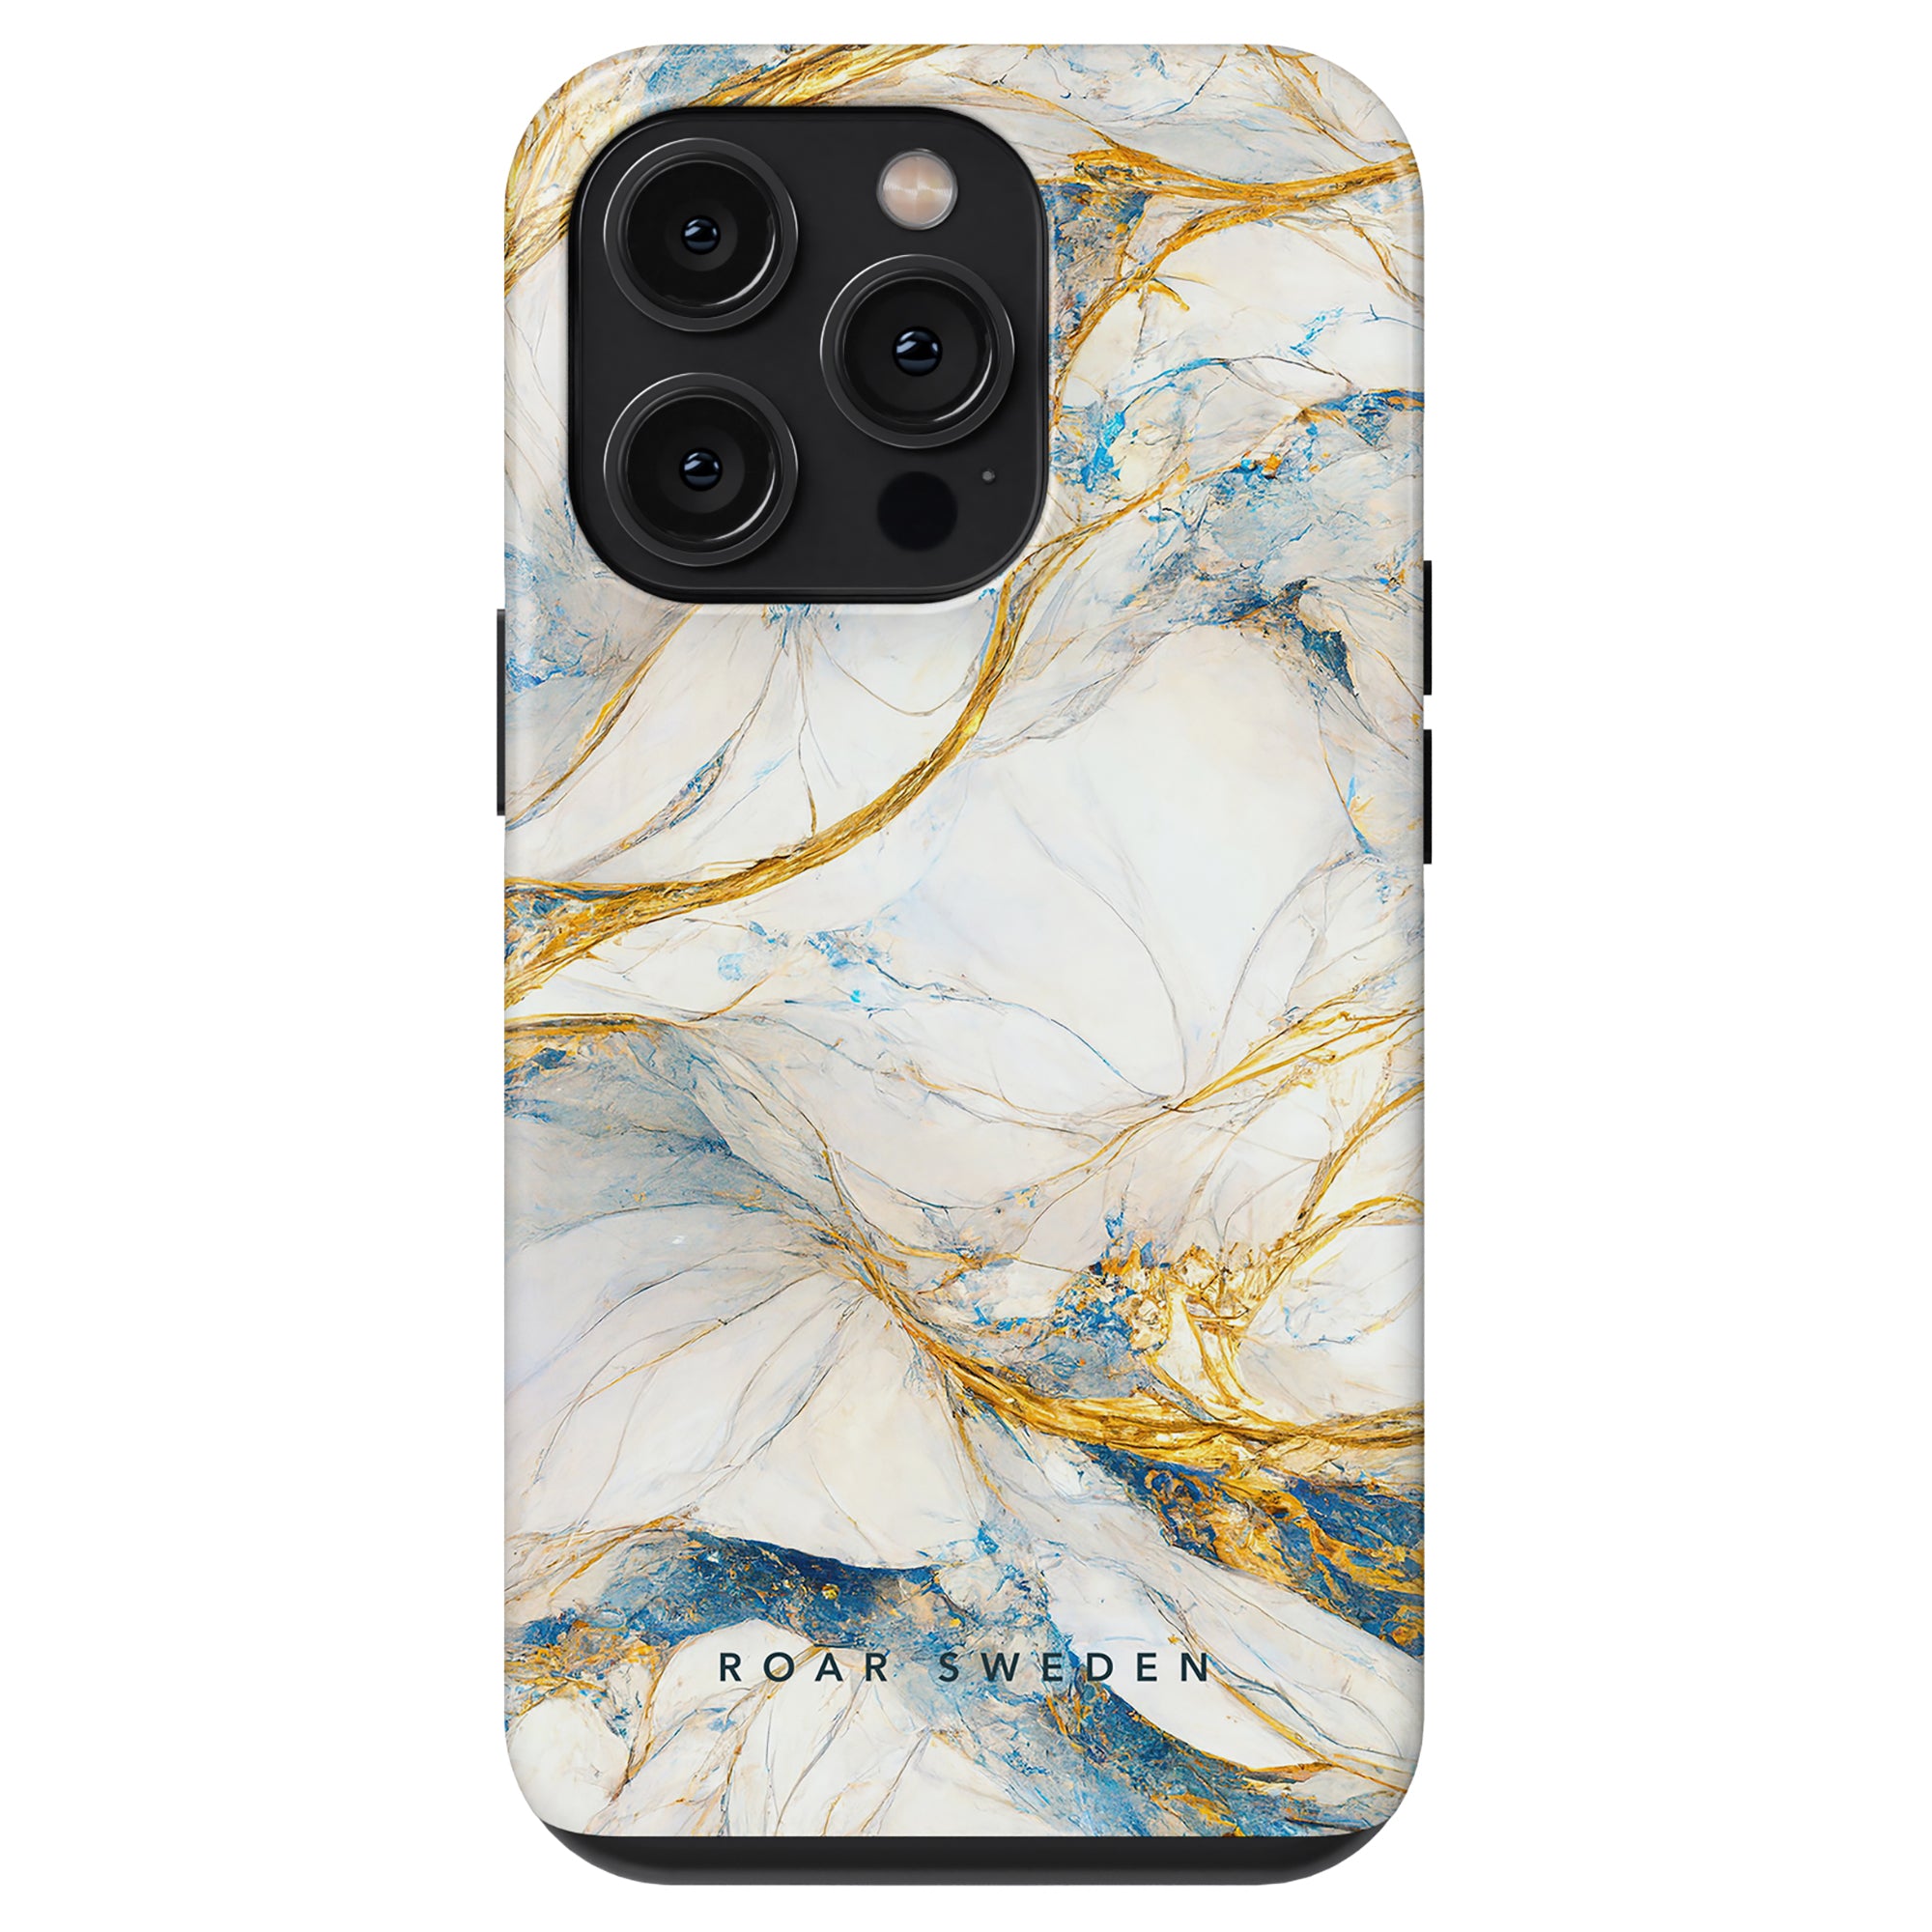 Queen Marble - Tough Case from the hybrid collection with a marbled white, blue, and gold design labeled "roar sweden" and equipped with camera cutouts.